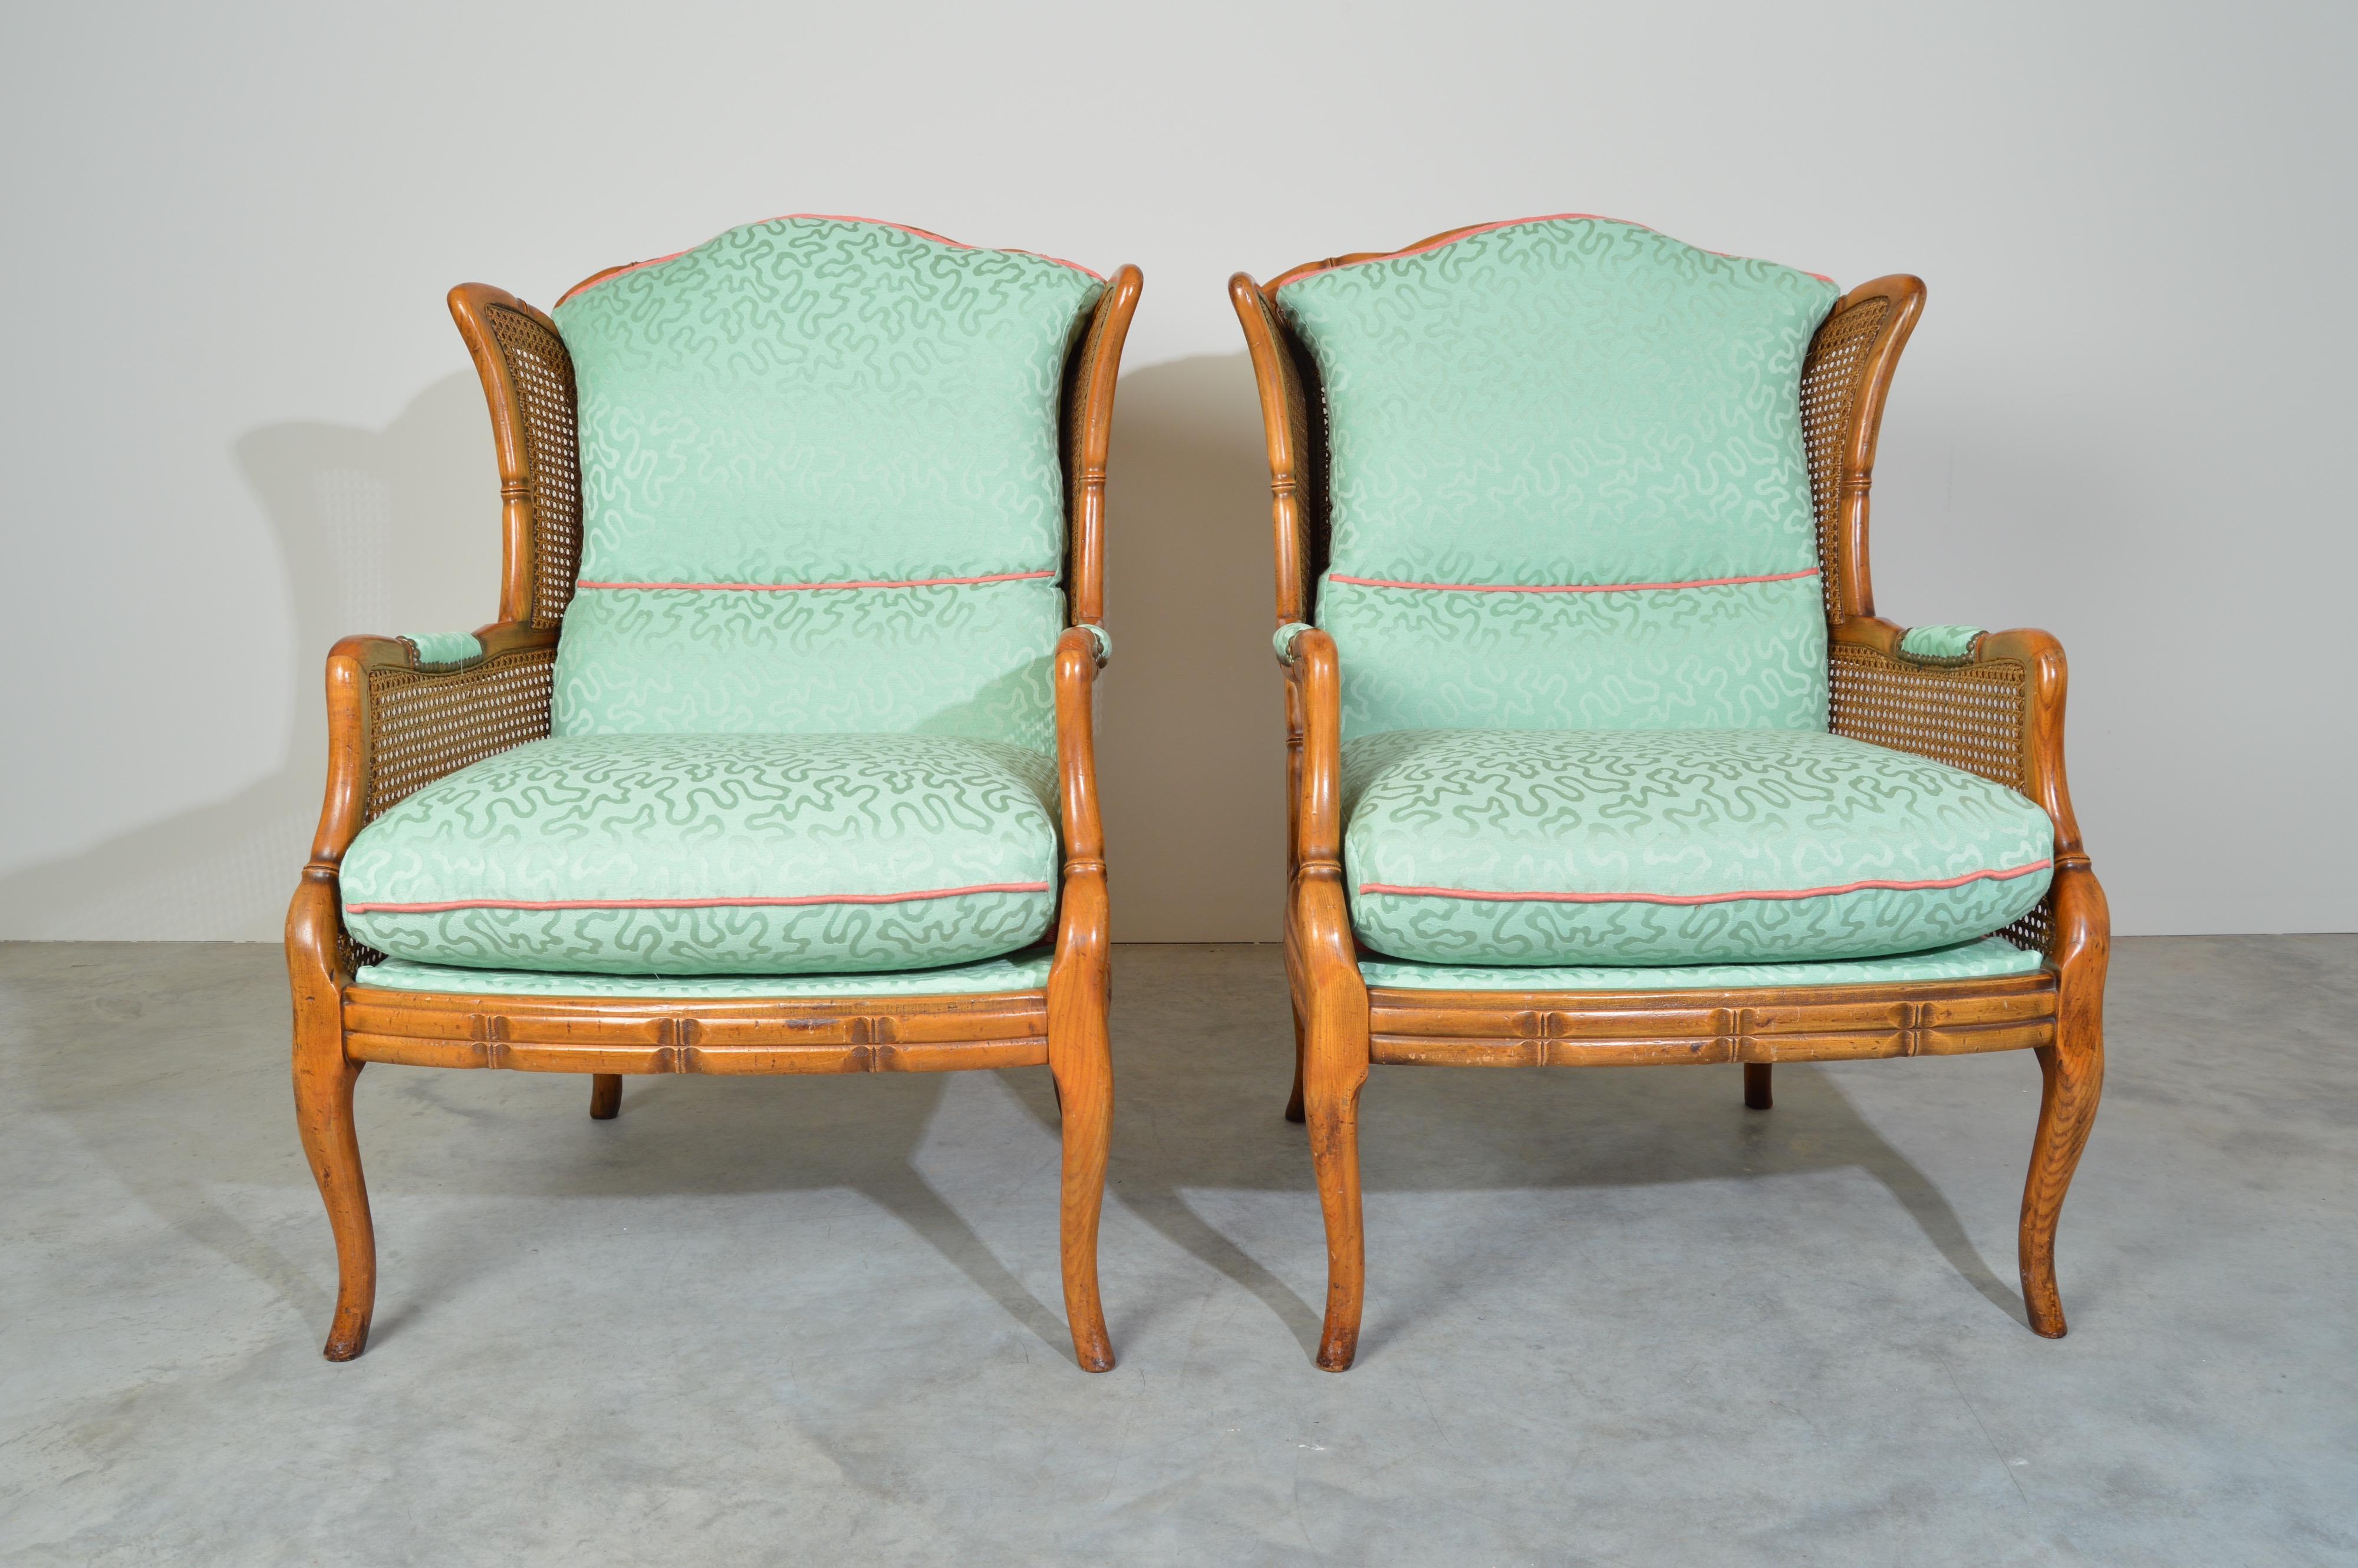 Regency style vintage faux bamboo wood frame wingback chairs with nicely scalloped crests and unusual full body caning.
New designer textured Keith Haring style upholstery. The chairs have been fully detailed and are in excellent